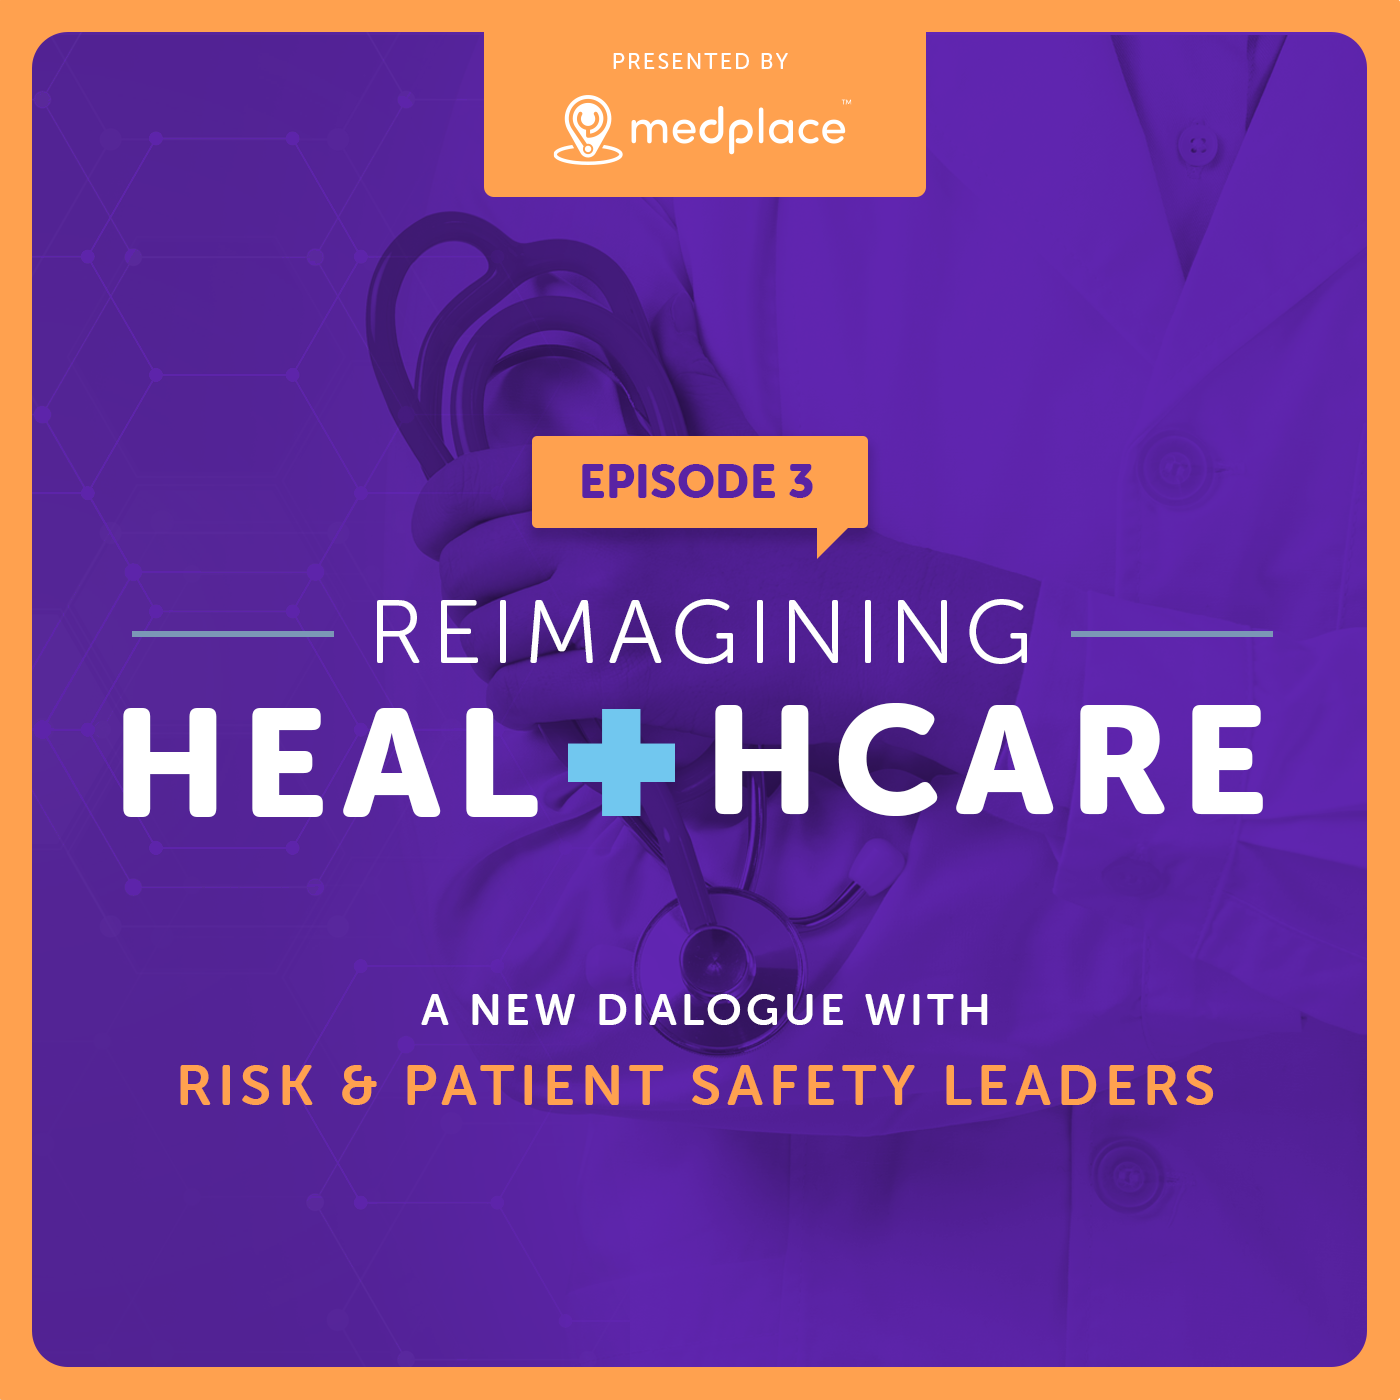 Episode 3 - Reimagining Healthcare - A New Dialogue with Risk and patient Safety Leaders